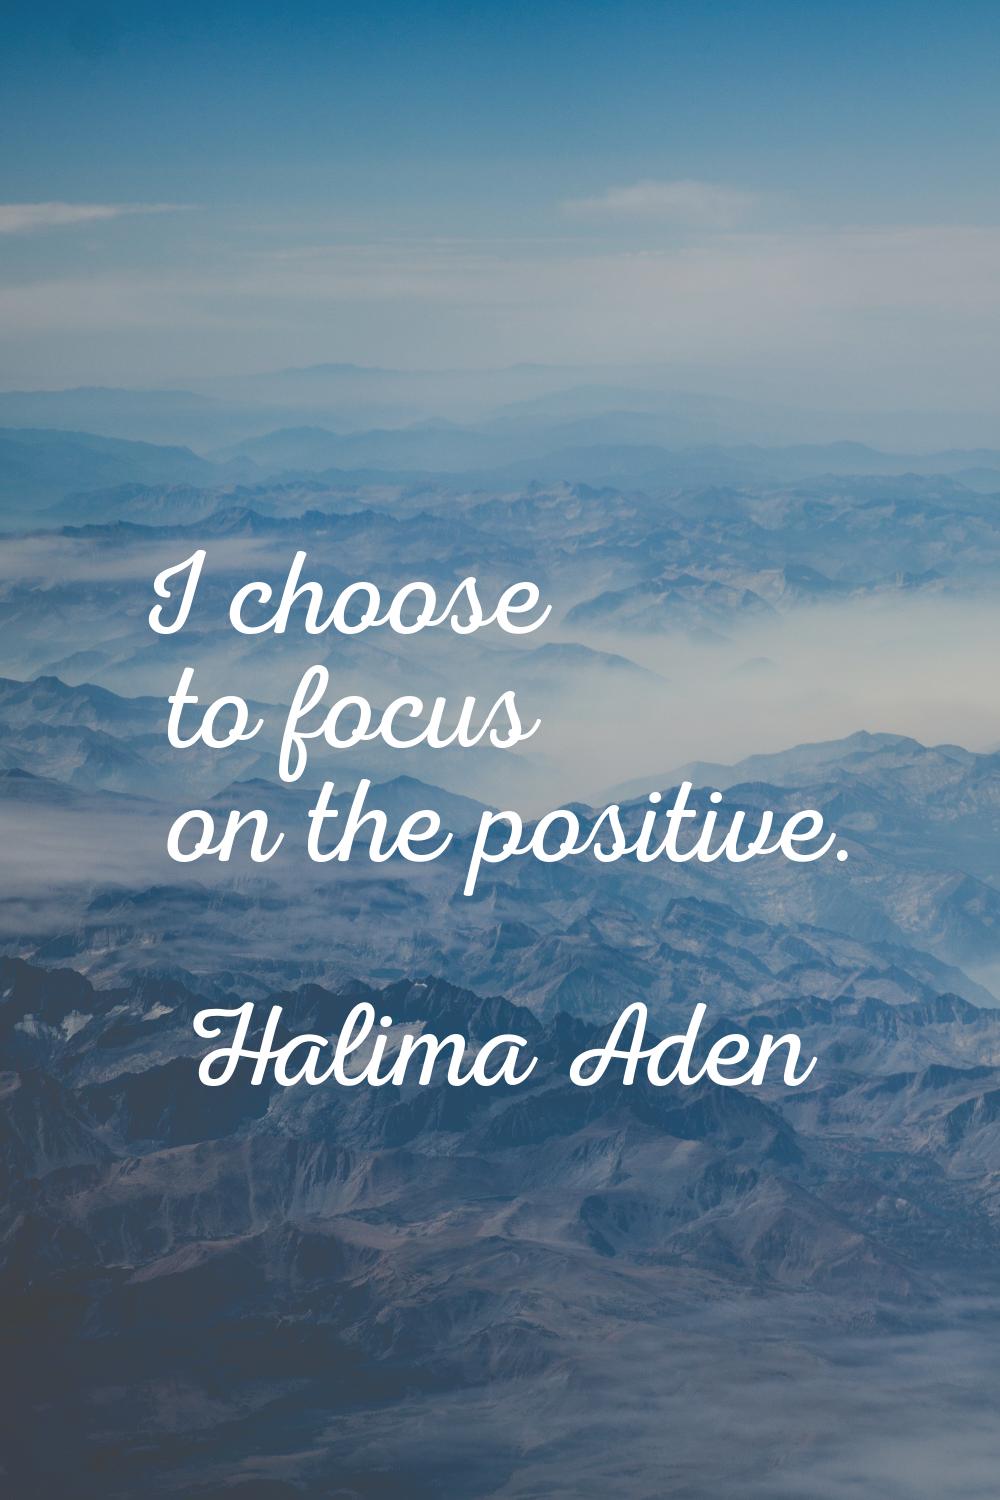 I choose to focus on the positive.